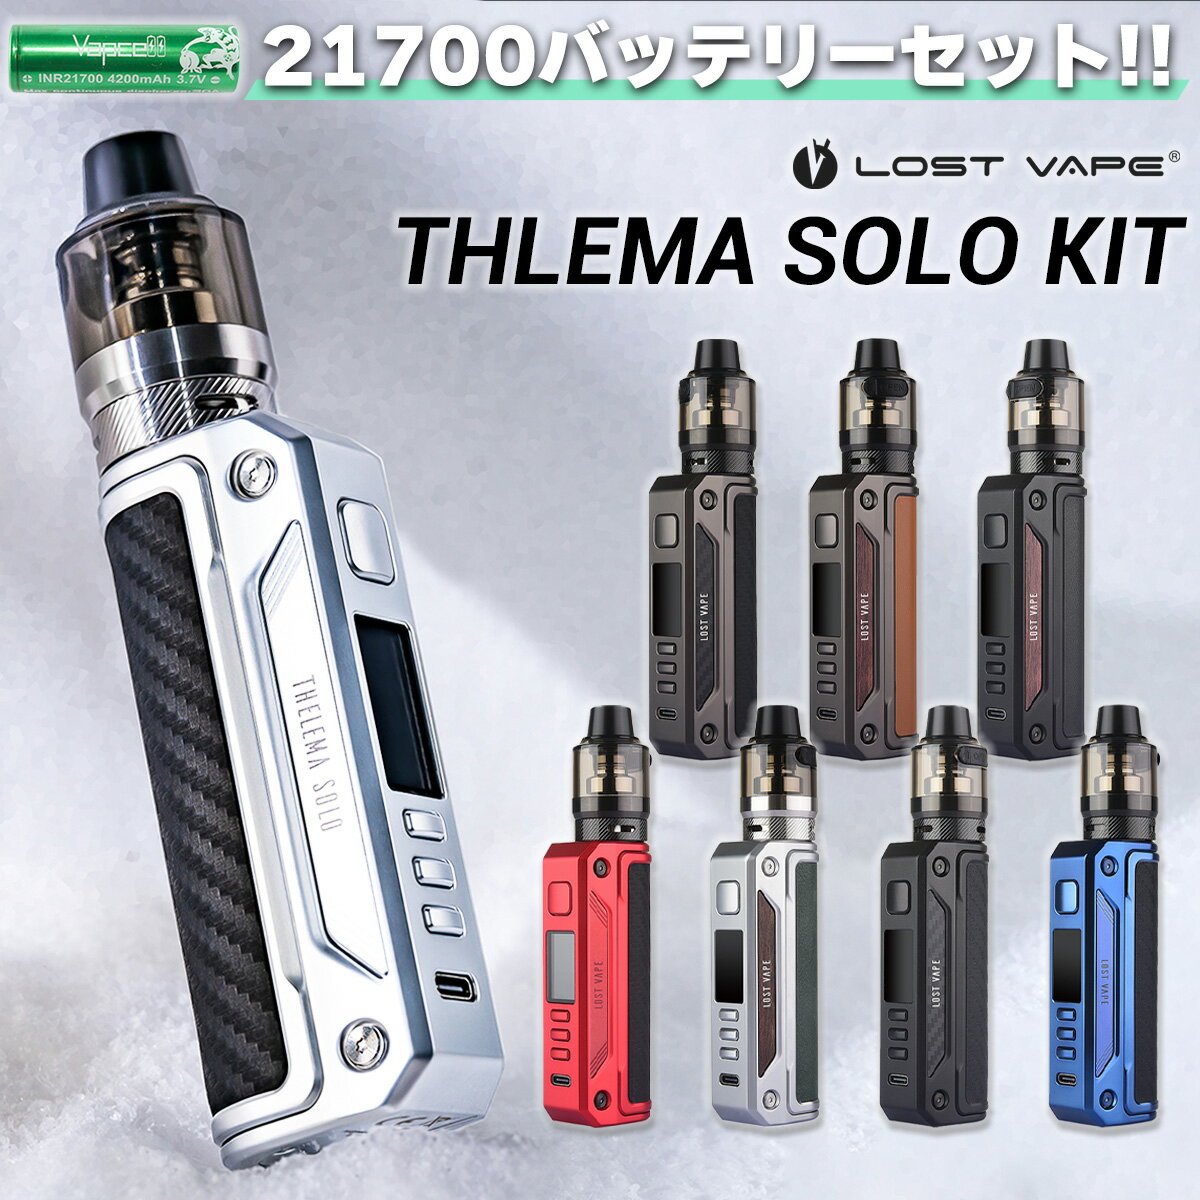 【<strong>バッテリー</strong>セット】 LOSTVAPE THELEMA SOLO 100W KIT ロストべイプ セレマソロ 100W キット 電子タバコ <strong>vape</strong> pod テクニカルMOD スターター キット 爆煙 <strong>21700</strong> シングル 電子タバコ タール ニコチン0 LOSTVAPE THELEMA SOLO KIT